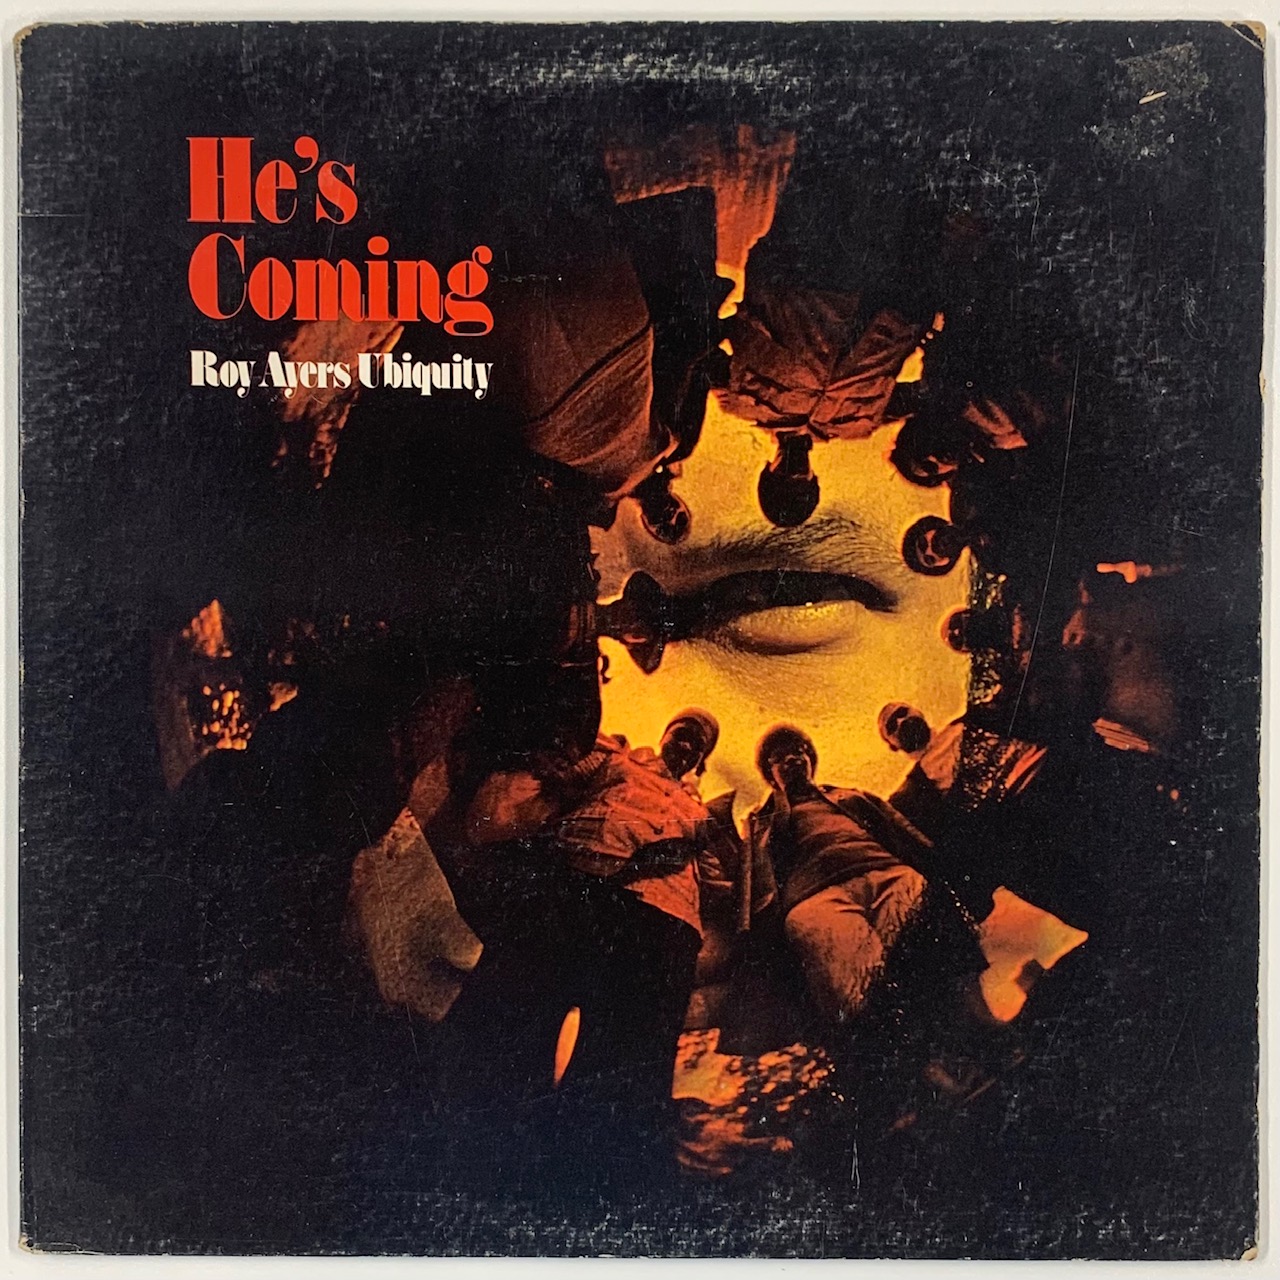 ROY AYERS UBIQUITY / HE'S COMING